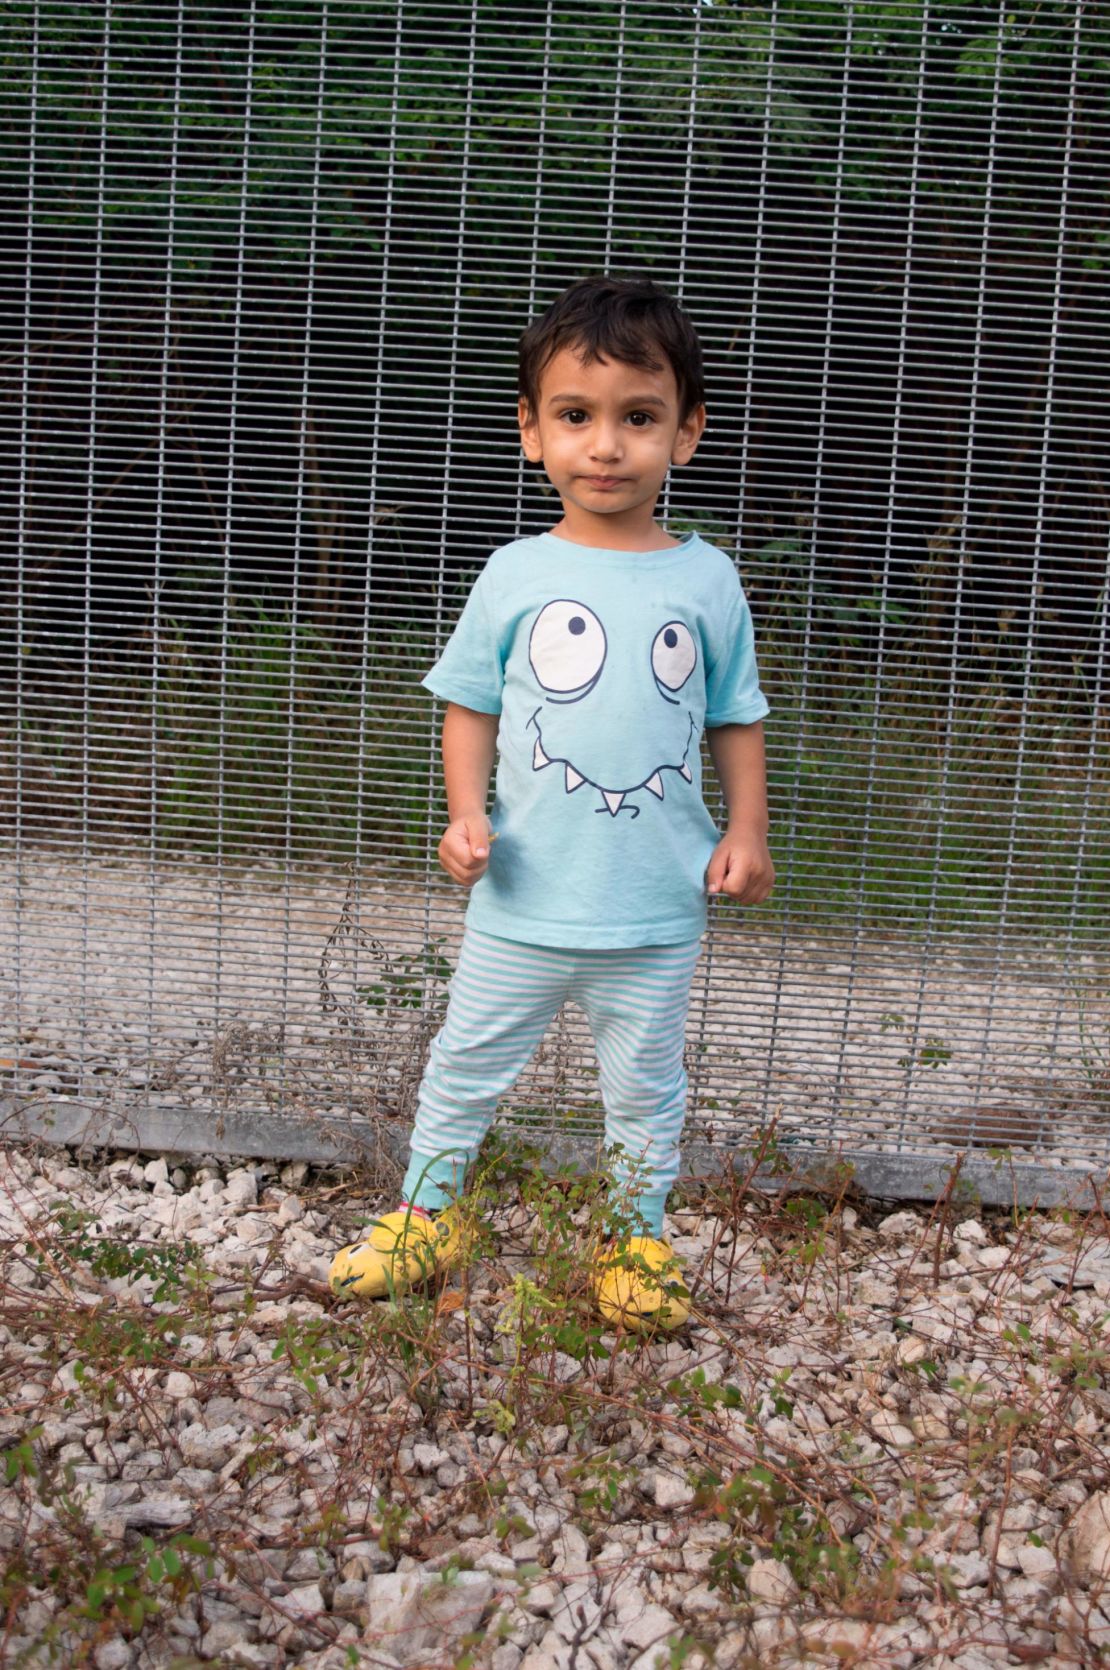 George likes to play with his toy car and he loves to write. He was born in Nauru -- the family have been on the island for 5 years.